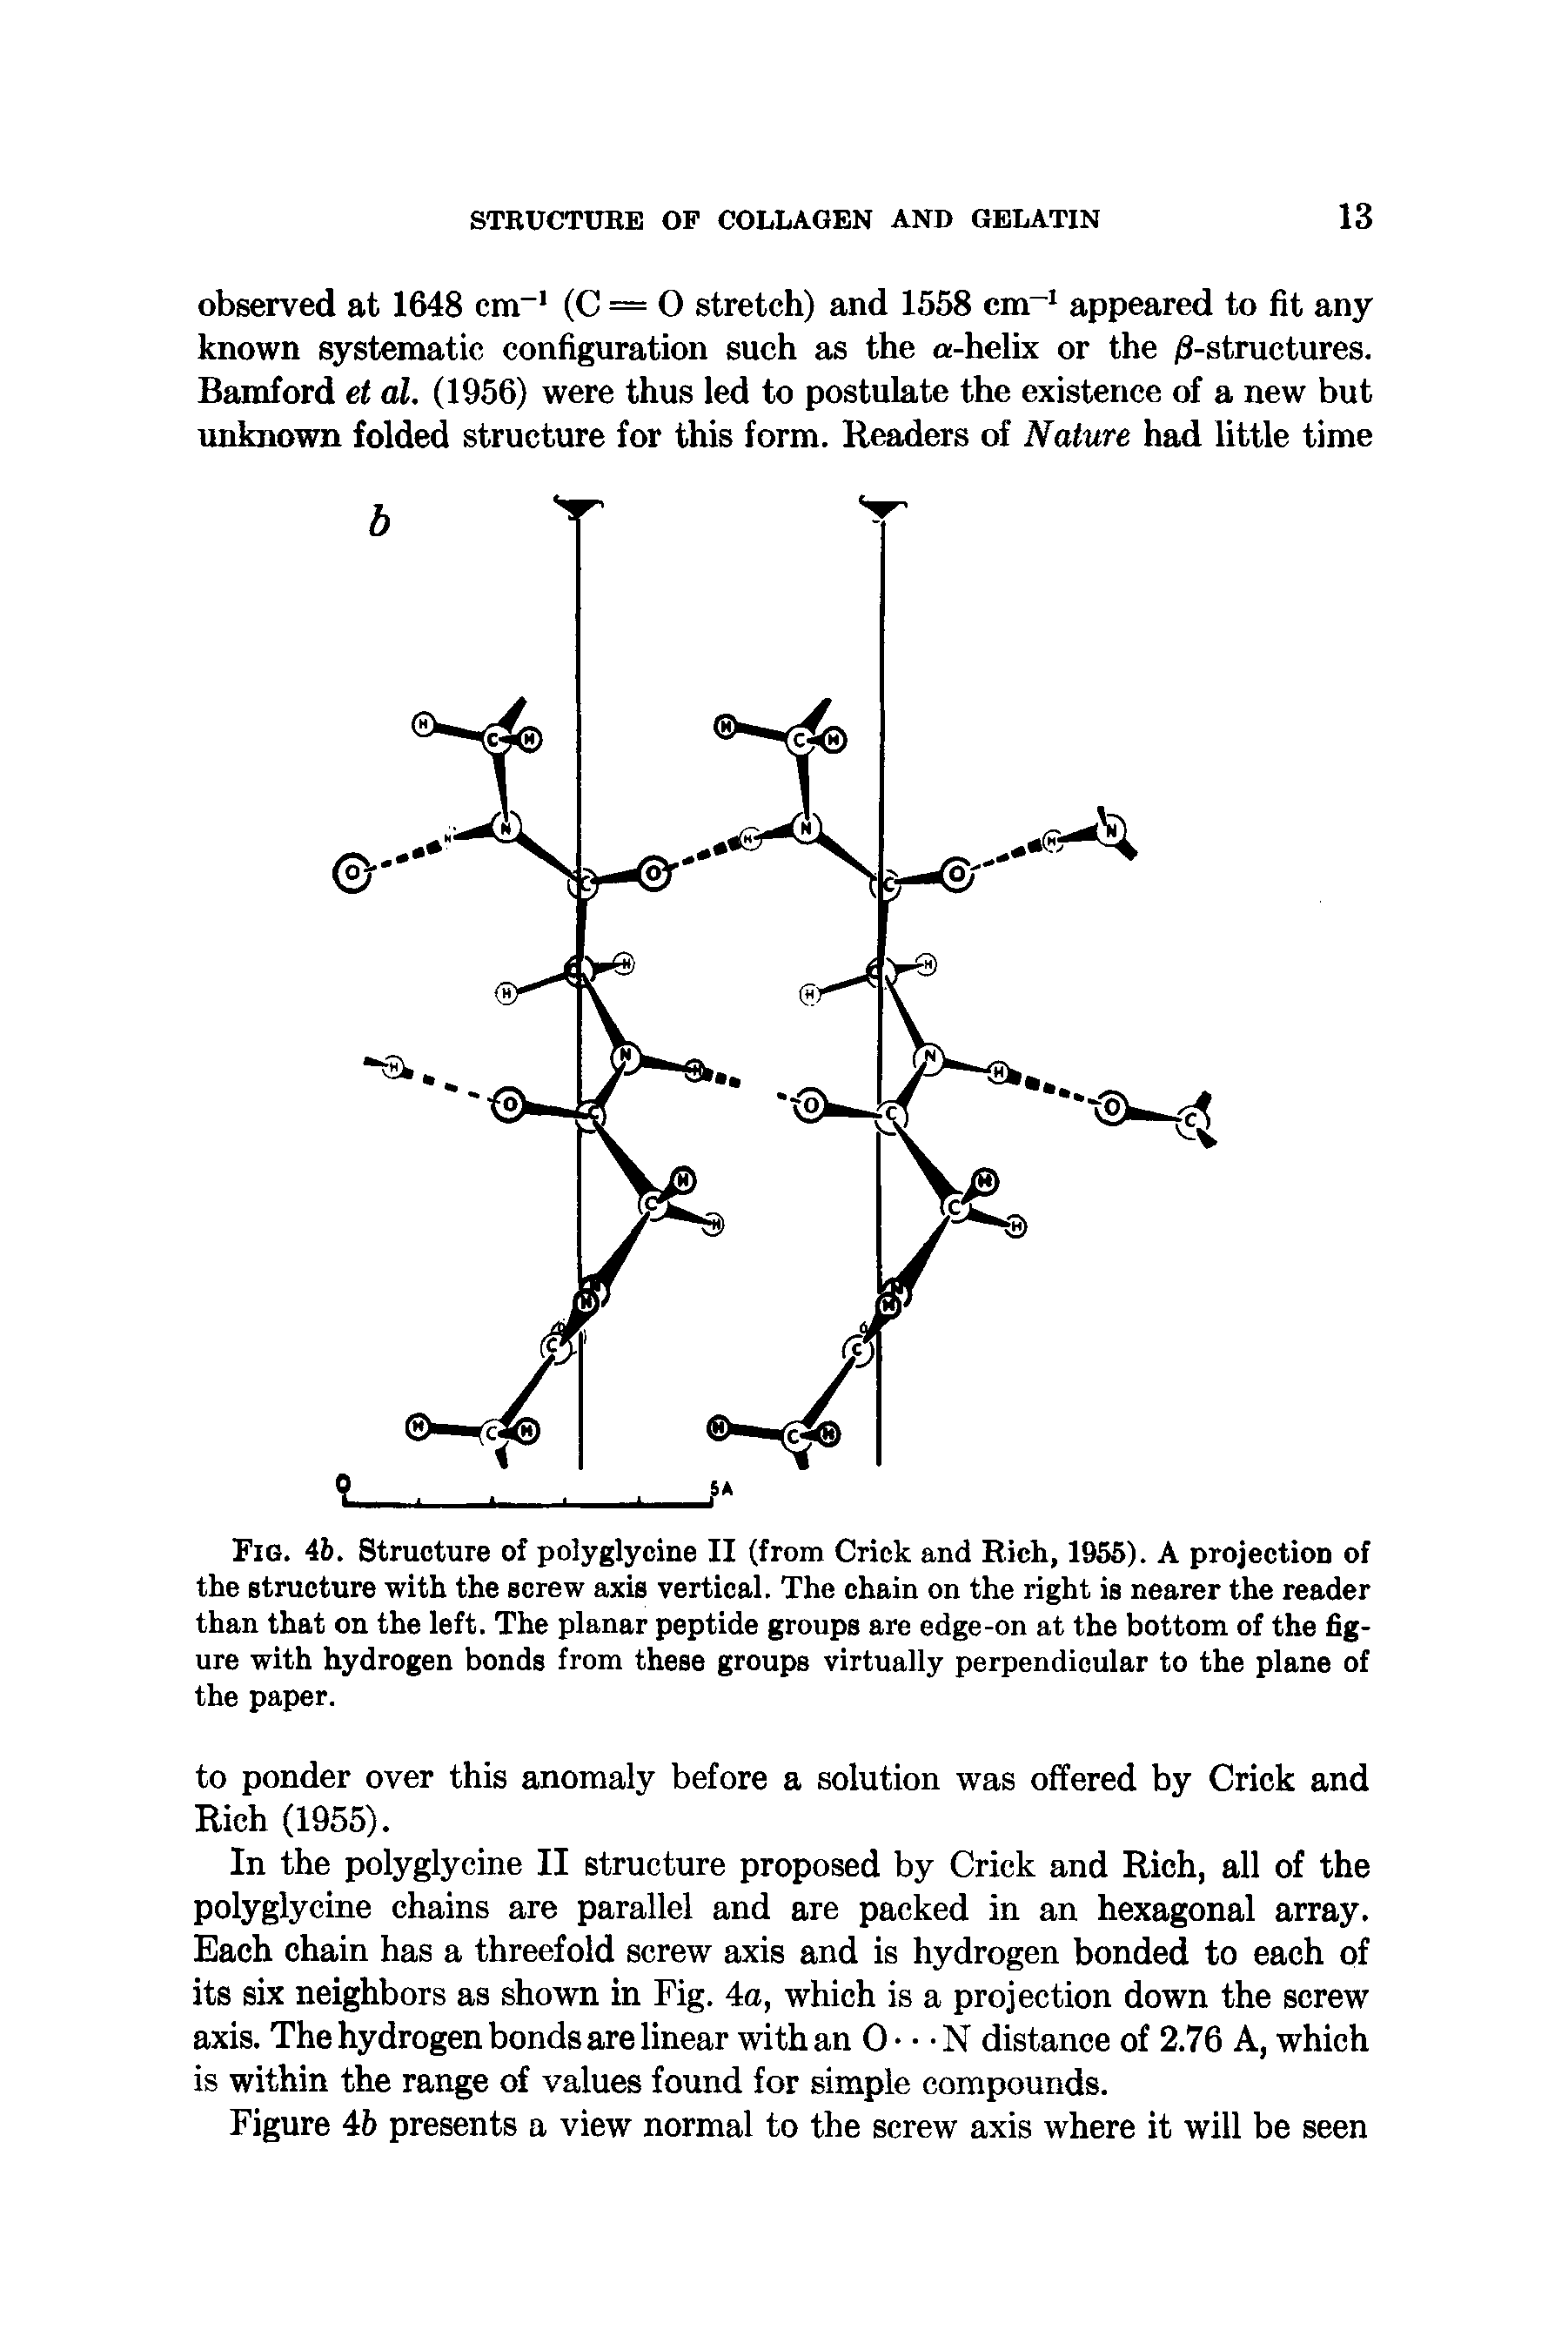 Fig. 4b. Structure of polyglycine II (from Crick and Rich, 1955). A projection of the structure with the screw axis vertical. The chain on the right is nearer the reader than that on the left. The planar peptide groups are edge-on at the bottom of the figure with hydrogen bonds from these groups virtually perpendicular to the plane of the paper.